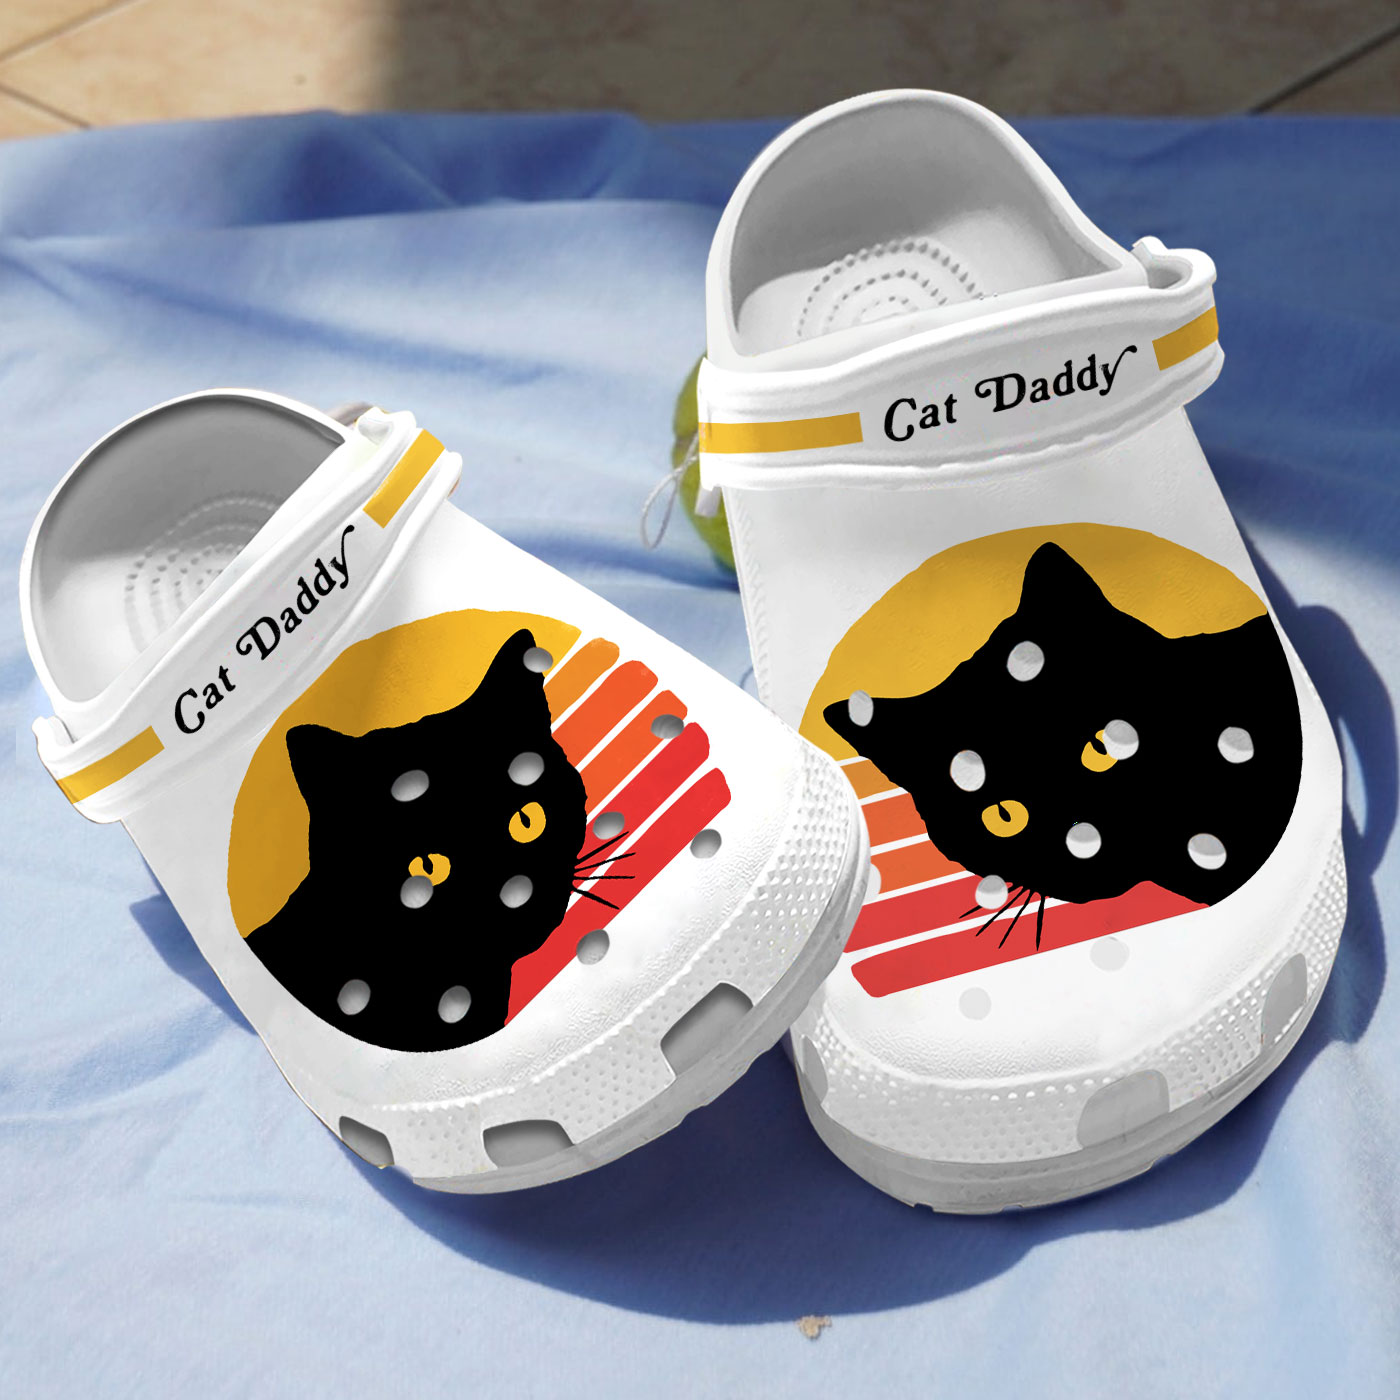 dad cat collection crocs lightweight and durable crocs easy to buy cbjof